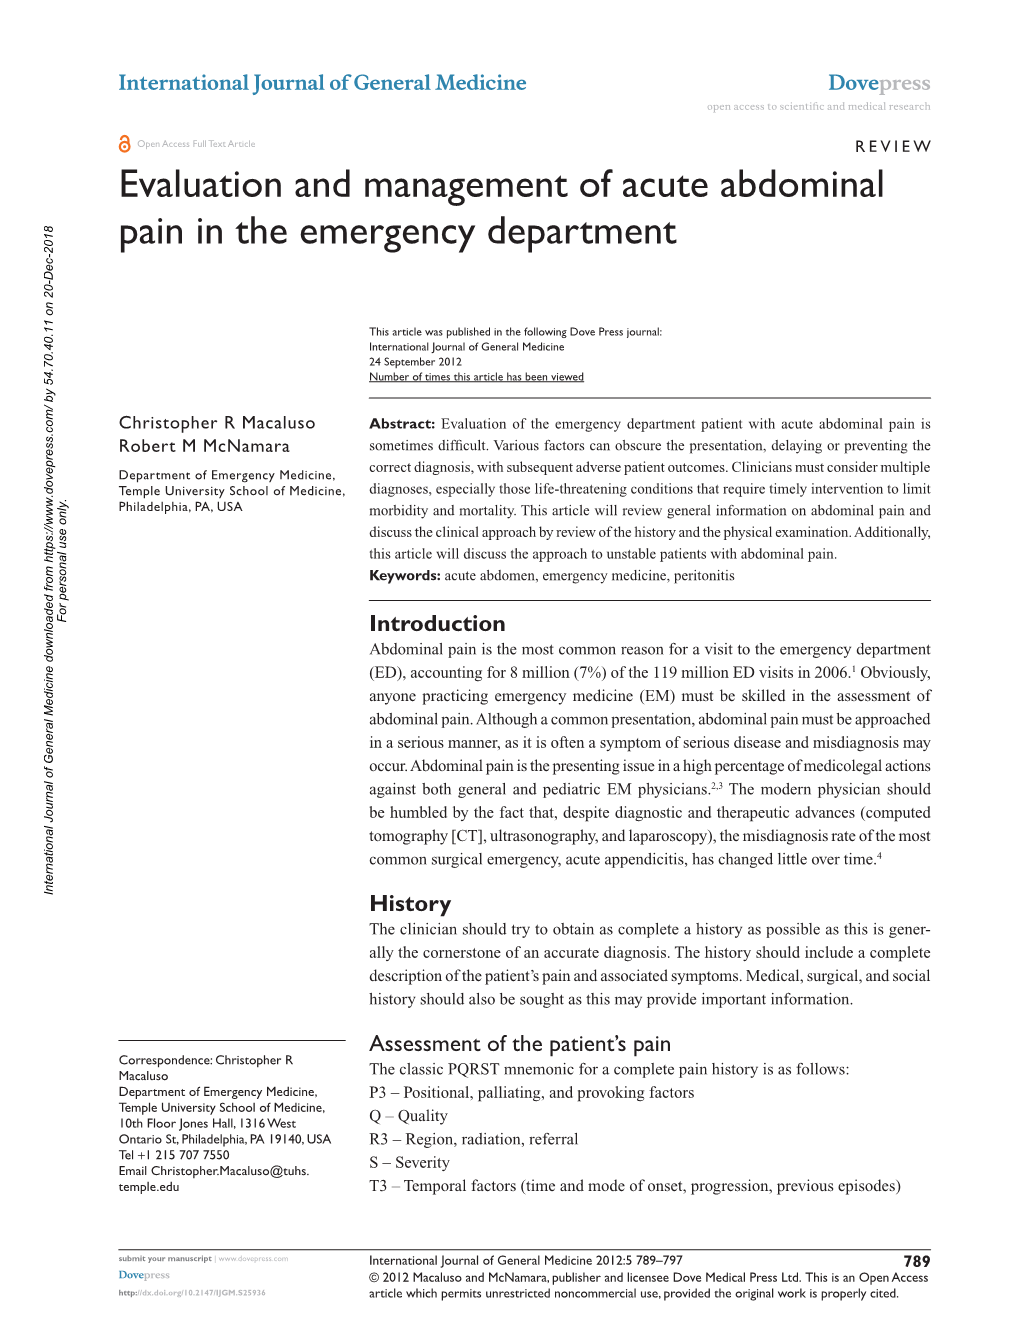 Evaluation and Management of Acute Abdominal Pain in the Emergency Department